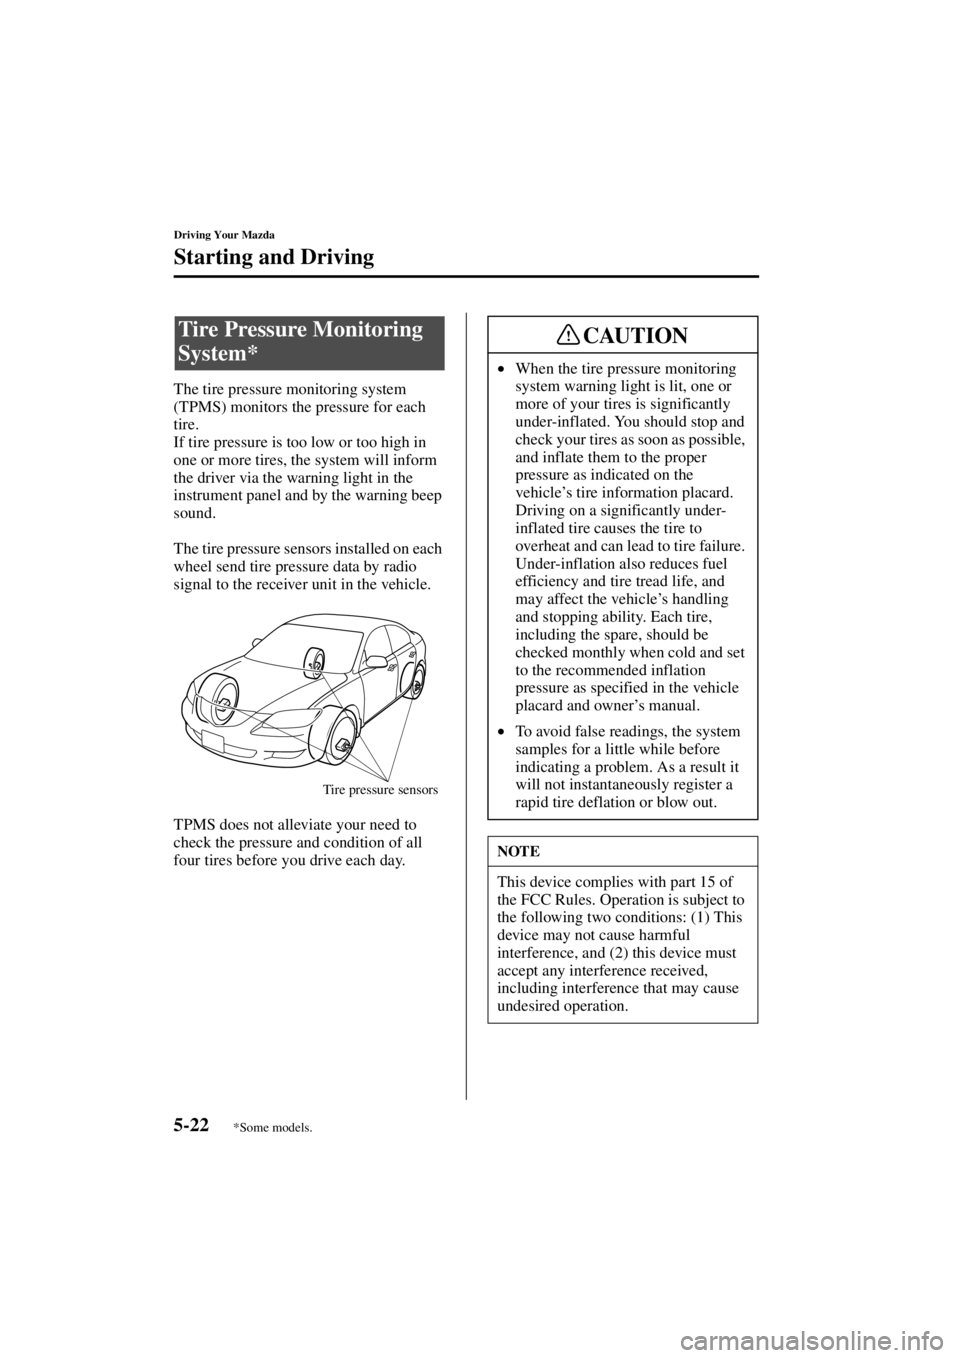 MAZDA MODEL 3 5-DOOR 2004 User Guide 5-22
Driving Your Mazda
Starting and Driving
Form No. 8S18-EA-03I
The tire pressure monitoring system 
(TPMS) monitors the pressure for each 
tire.
If tire pressure is too low or too high in 
one or m